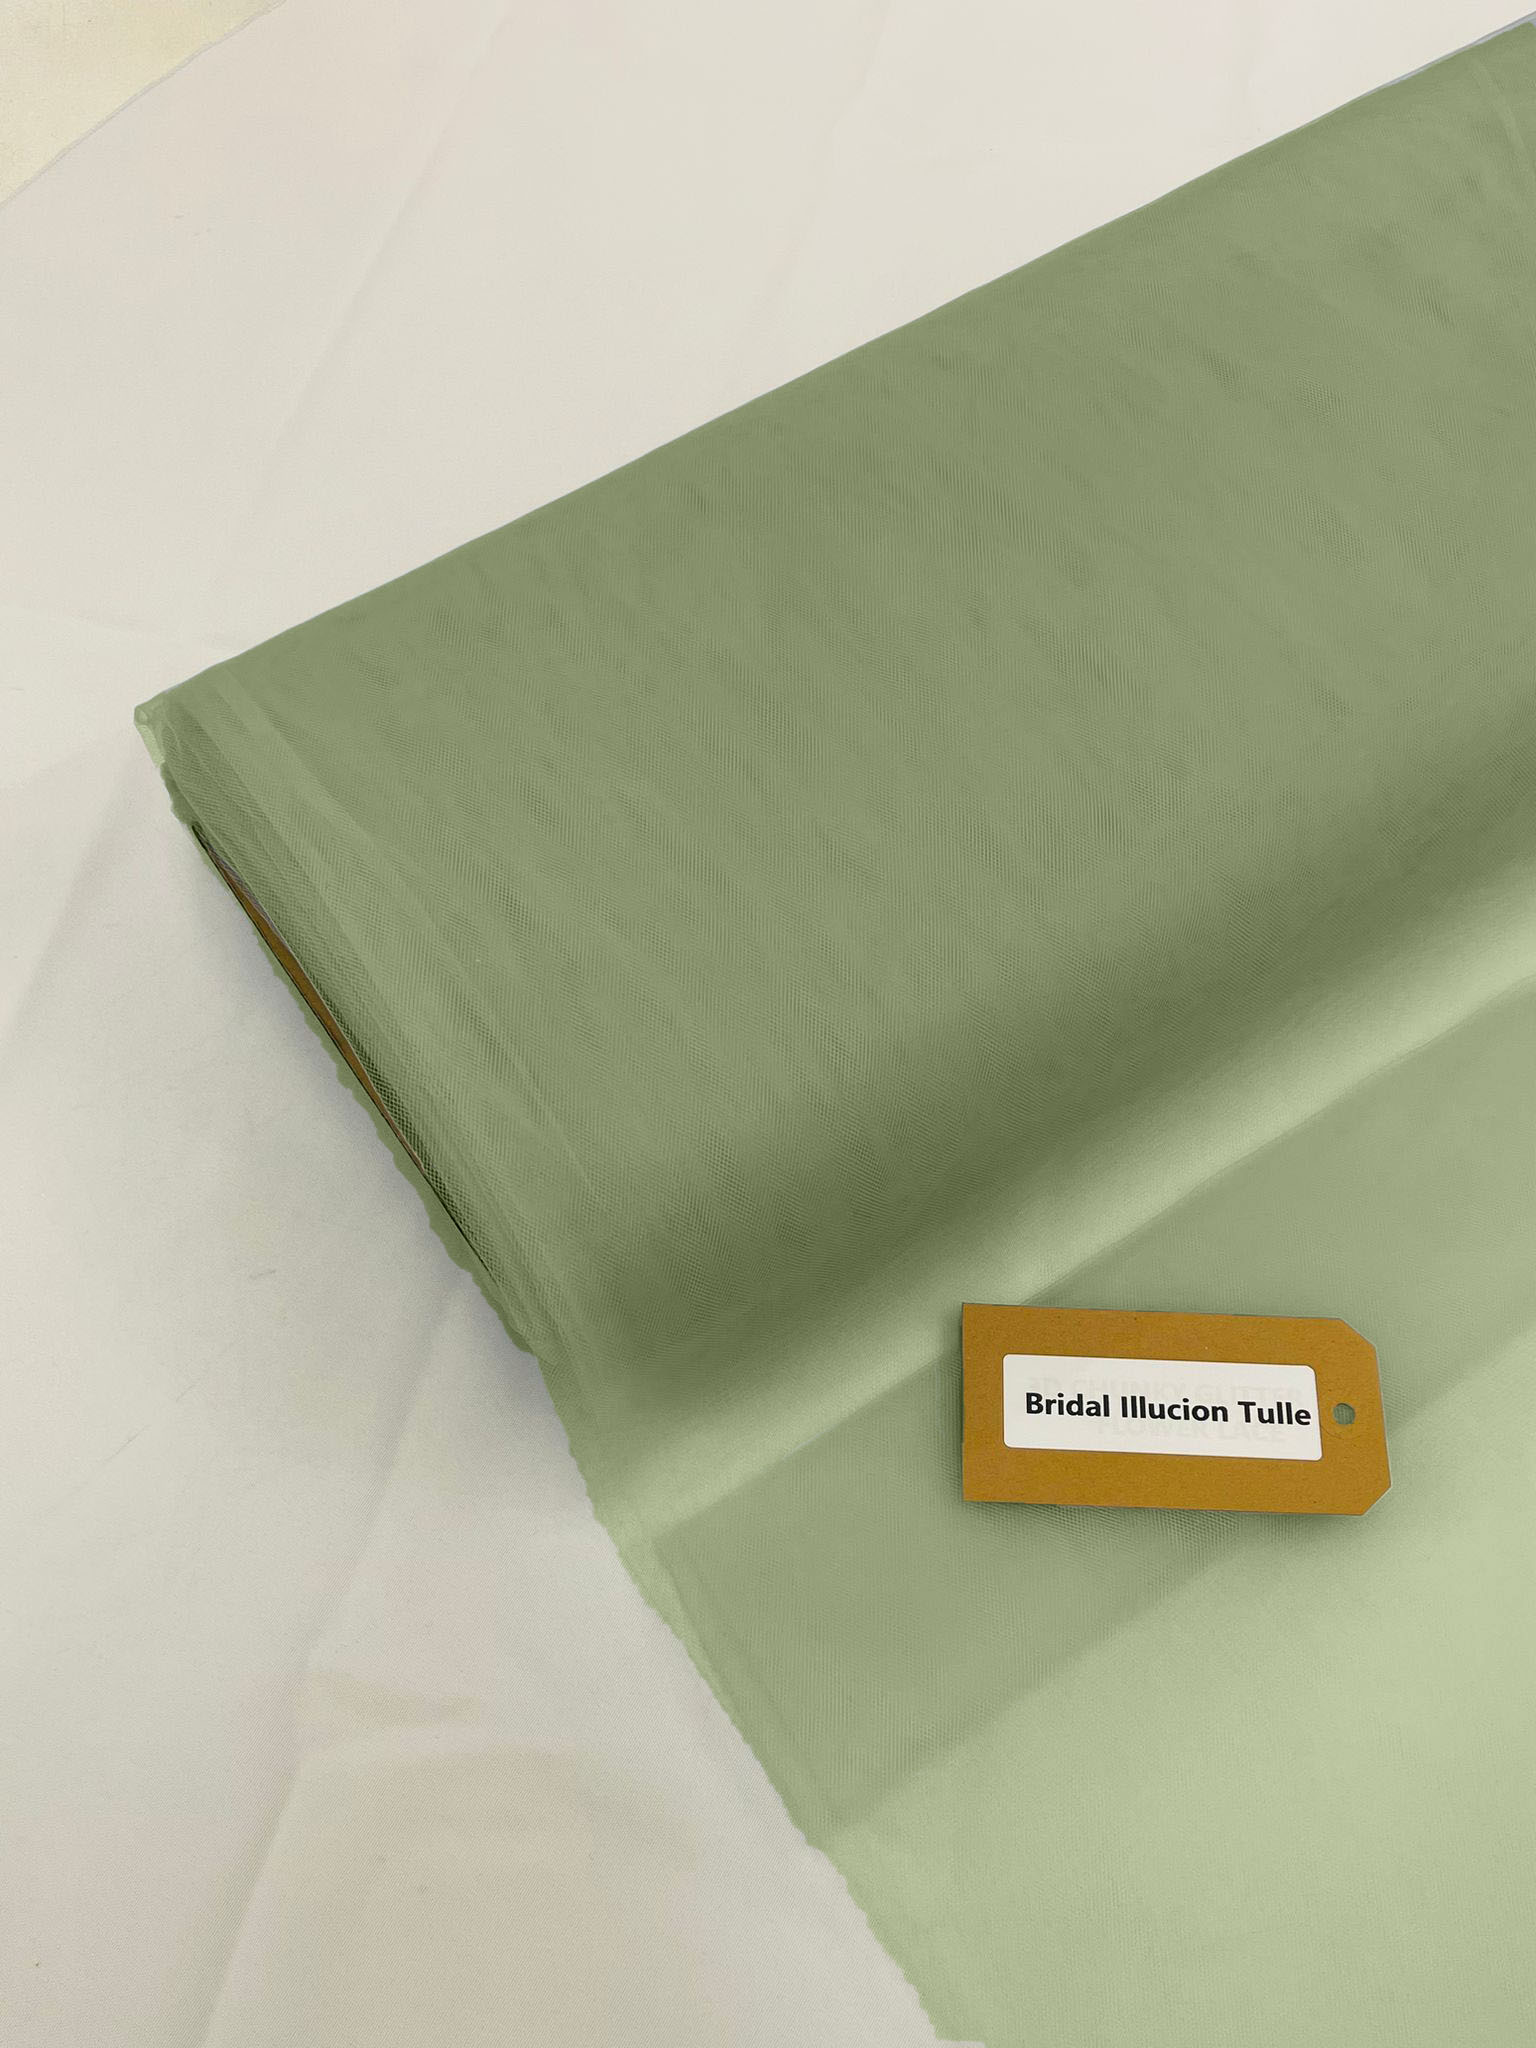 Sage Green - Bridal Illusion Tulle 108"Wide Polyester Premium Tulle Fabric Bolt, By The Roll.